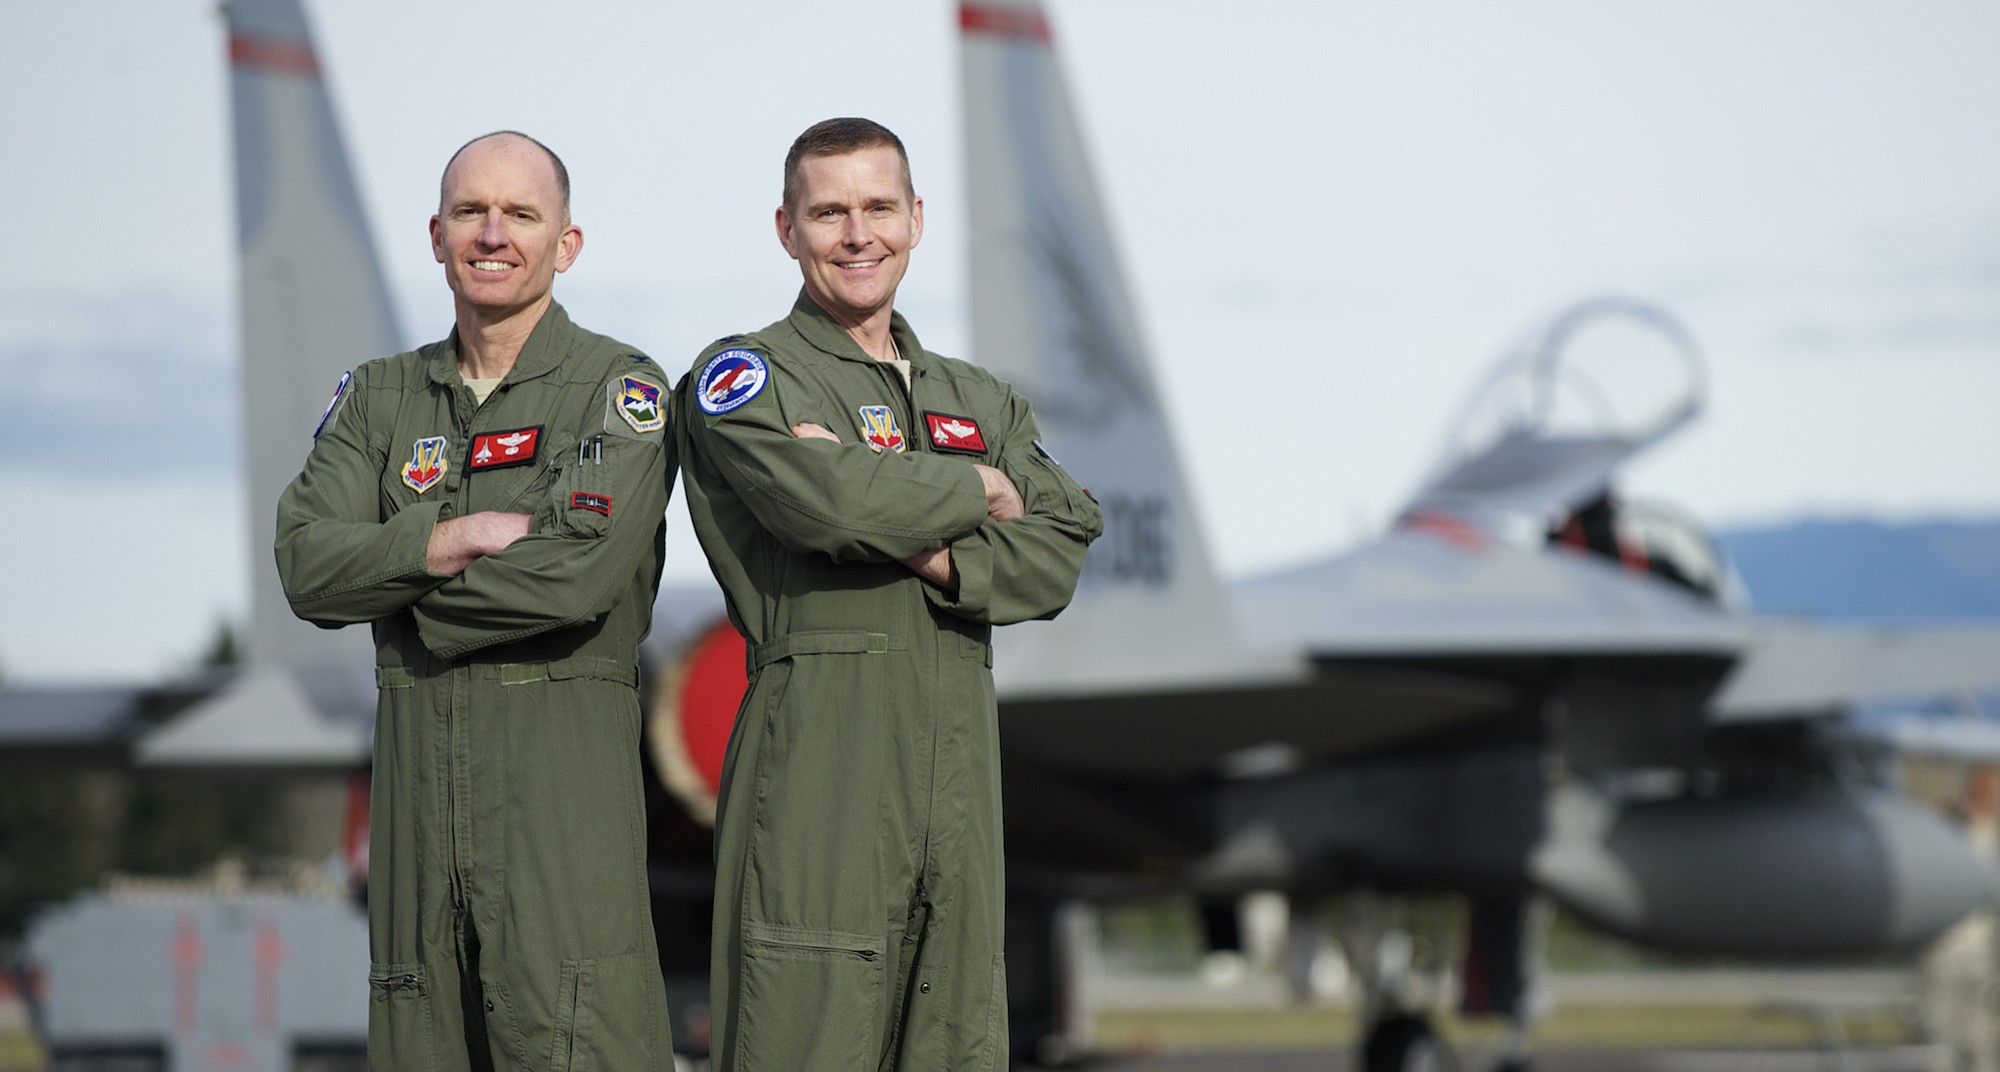 Col. Paul Fitzgerald, left, of Hockinson, is the new commander of the 142nd Fighter Wing at Portland Air National Guard Base after the retirement of Vancouver pilot Col.